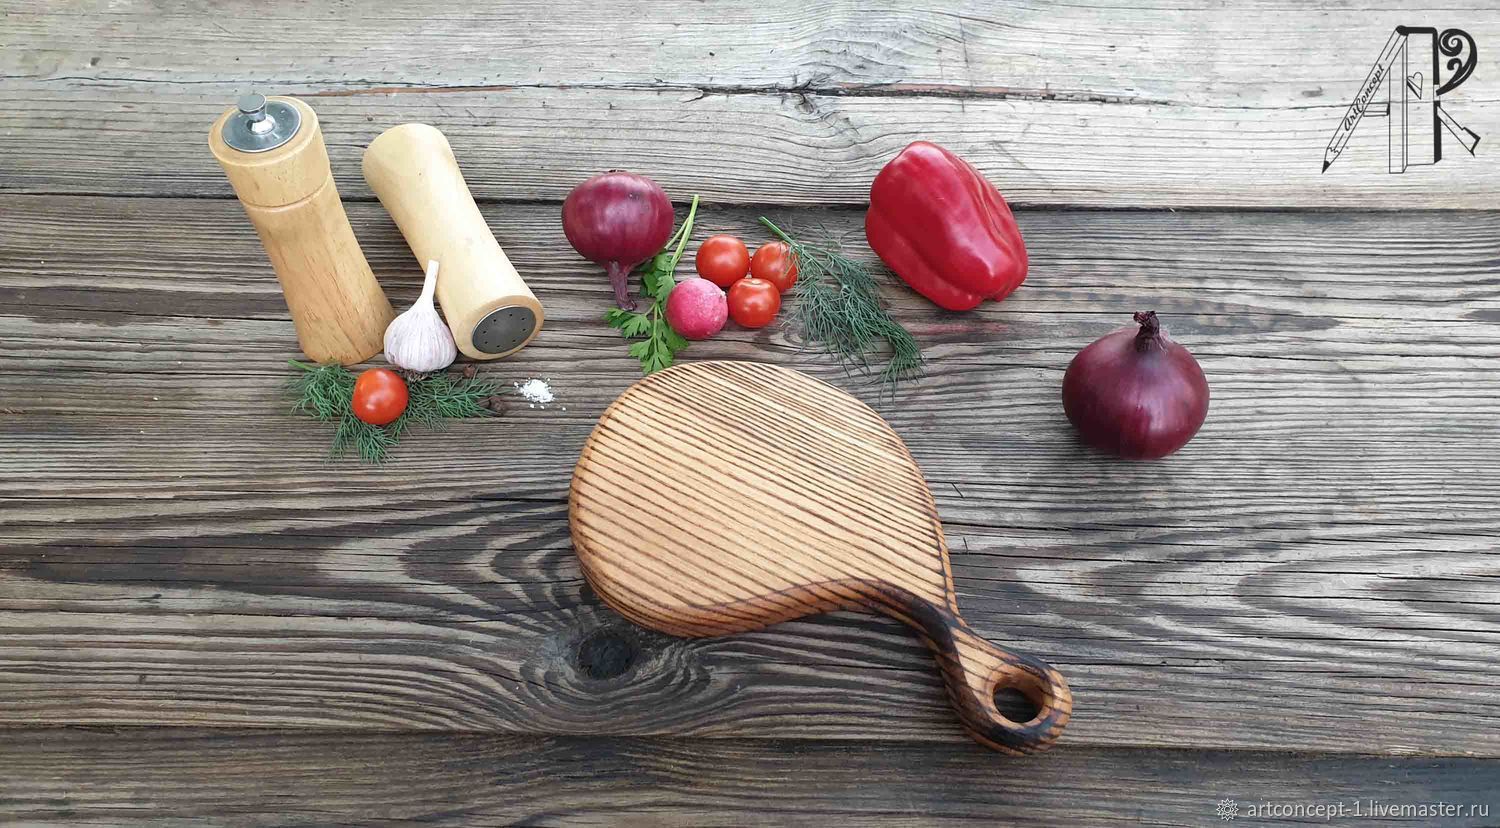 Ash Burger Serving and Cutting Board for Serving Burgers, Cutting Boards, Ryazan,  Фото №1